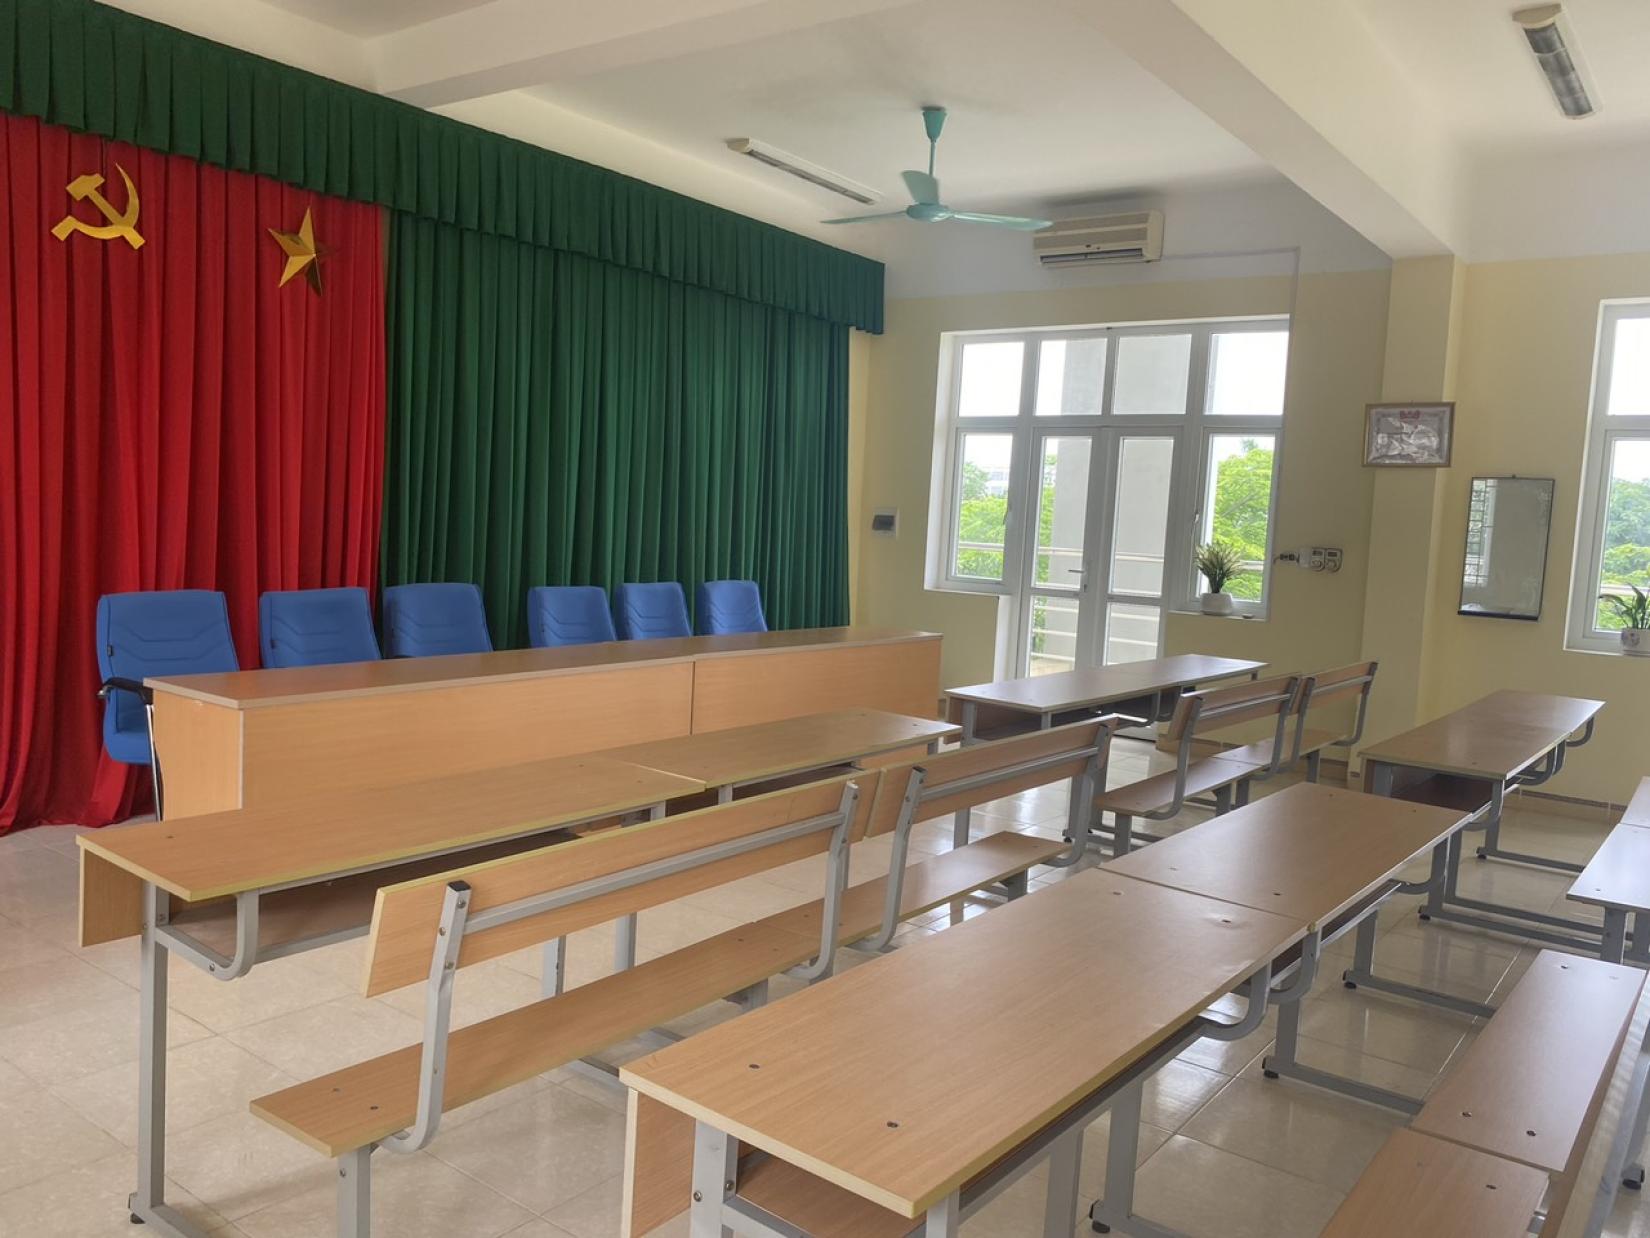 The modest psychological counselling room at Hong Duc University, shown in June 2022